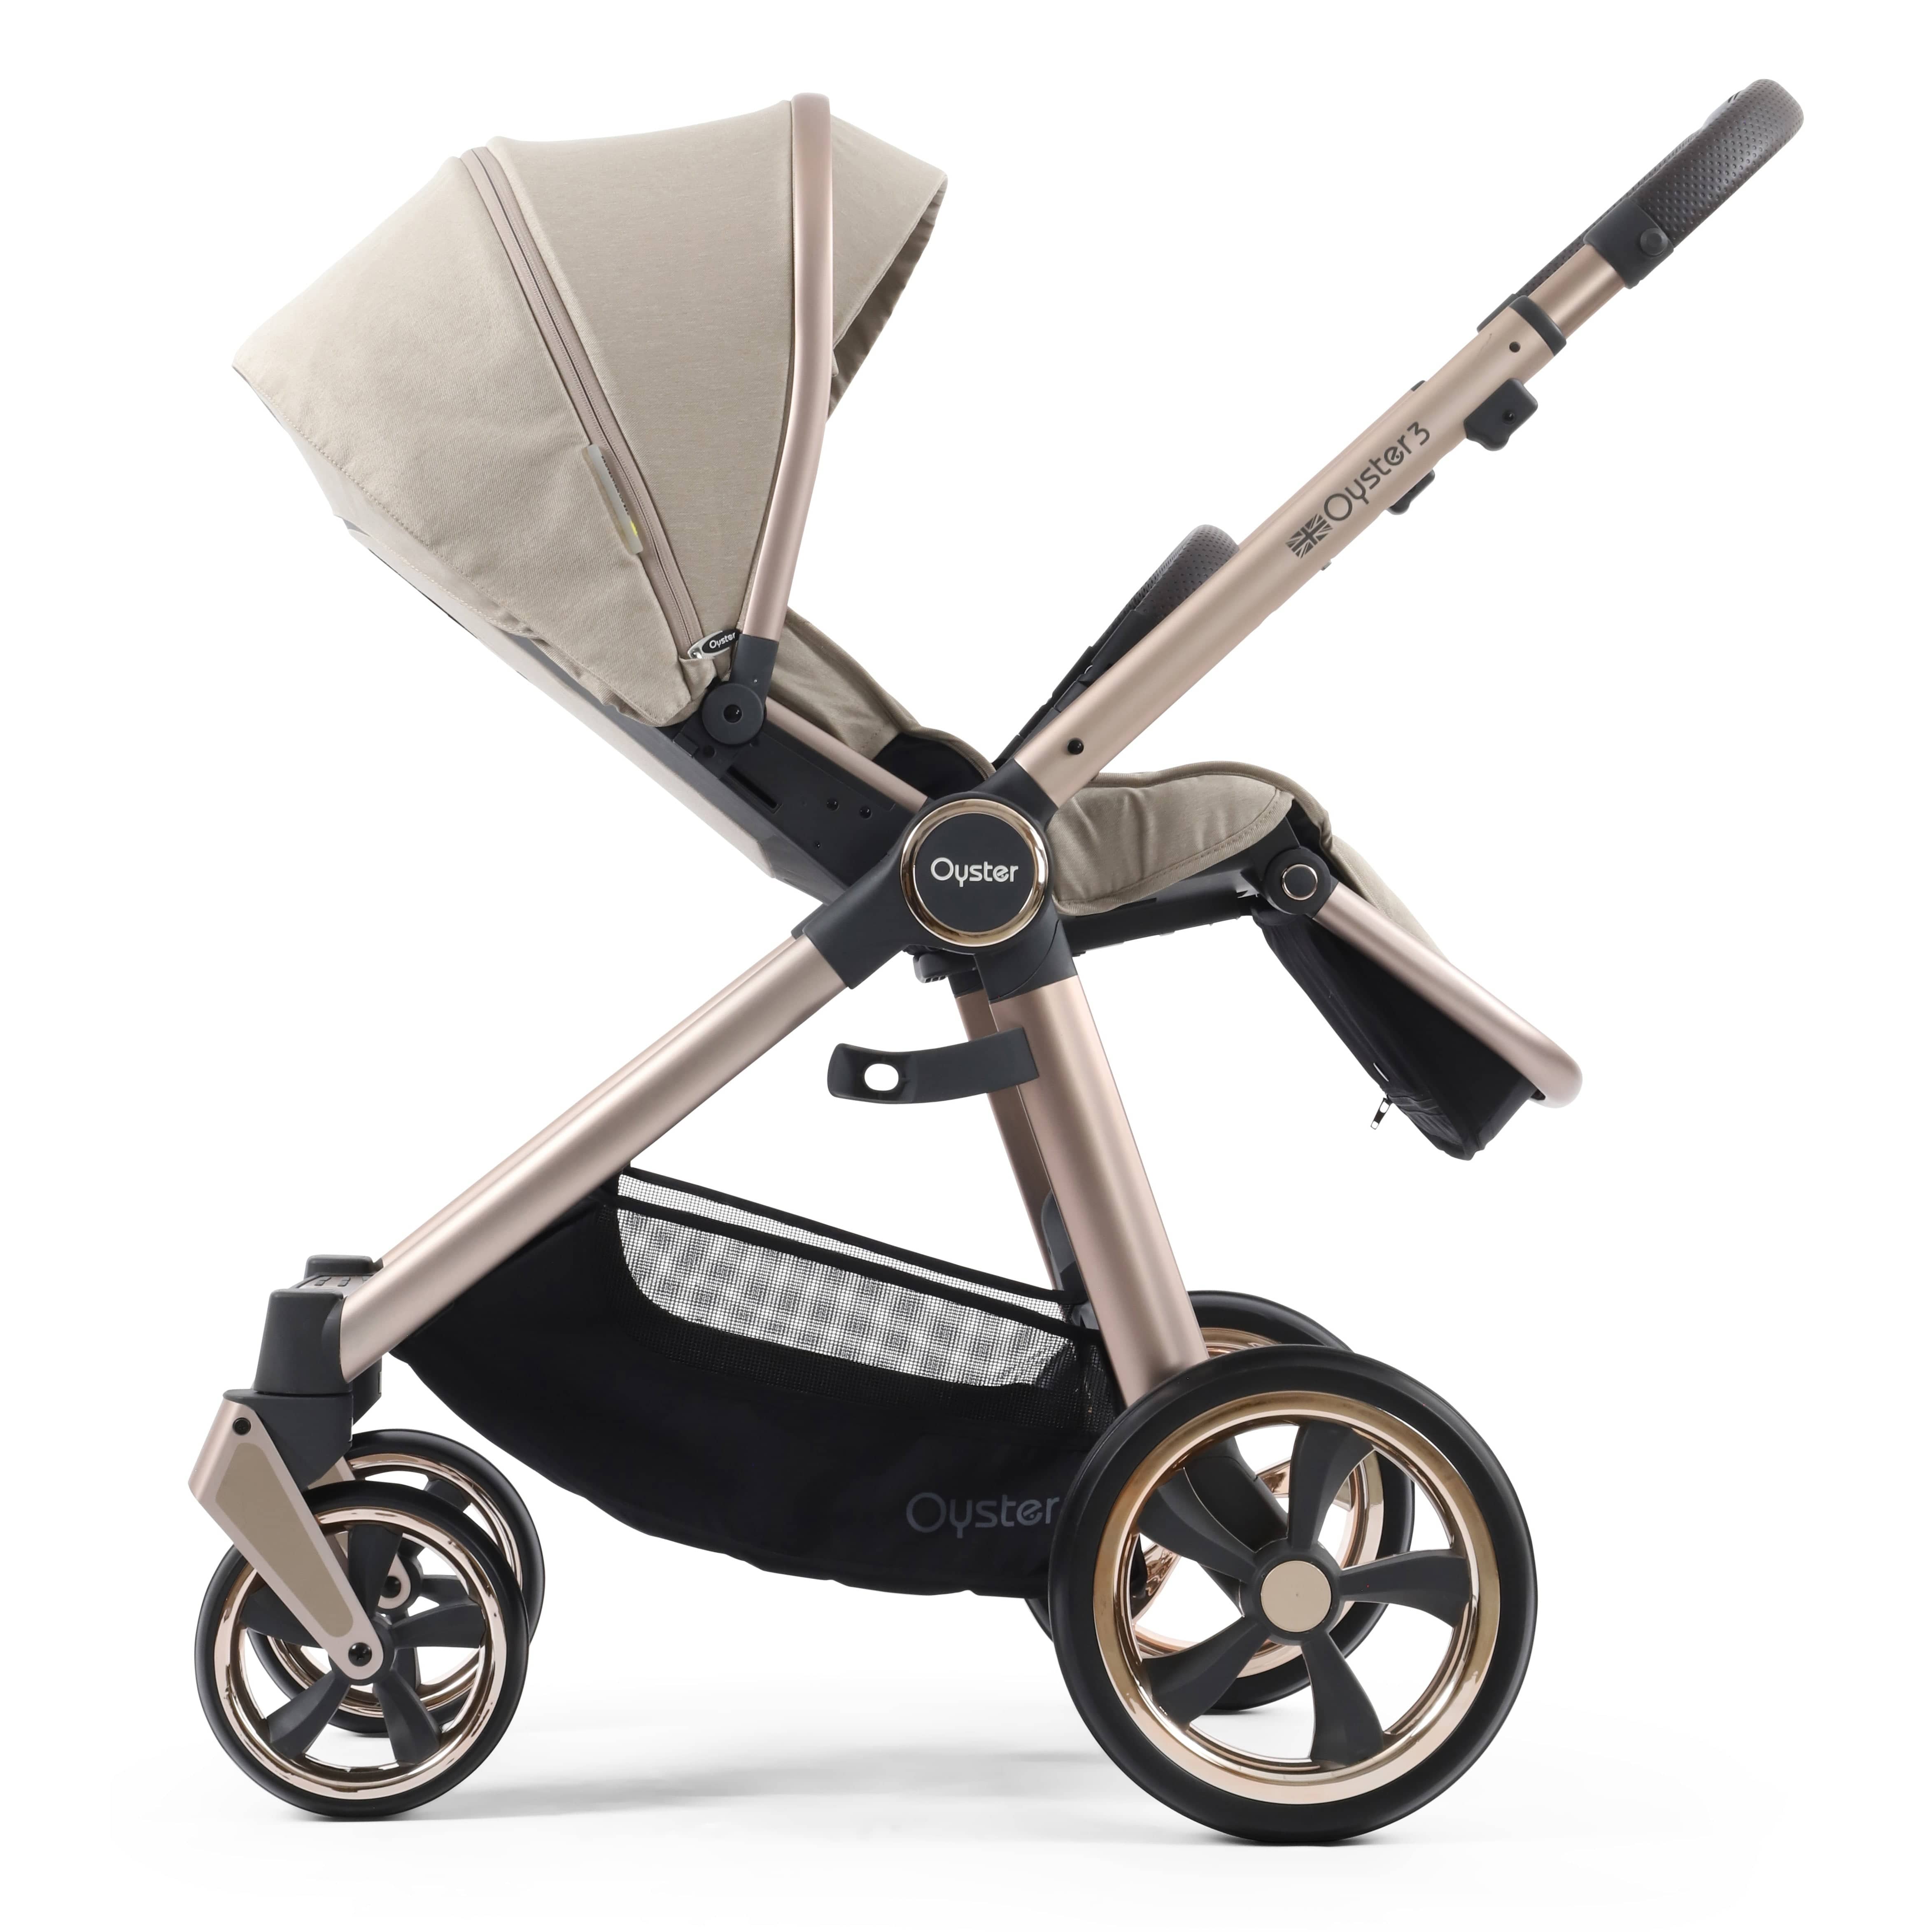 BabyStyle baby prams BabyStyle Oyster3 Pram & Carrycot Creme Brulee 14729-CMB